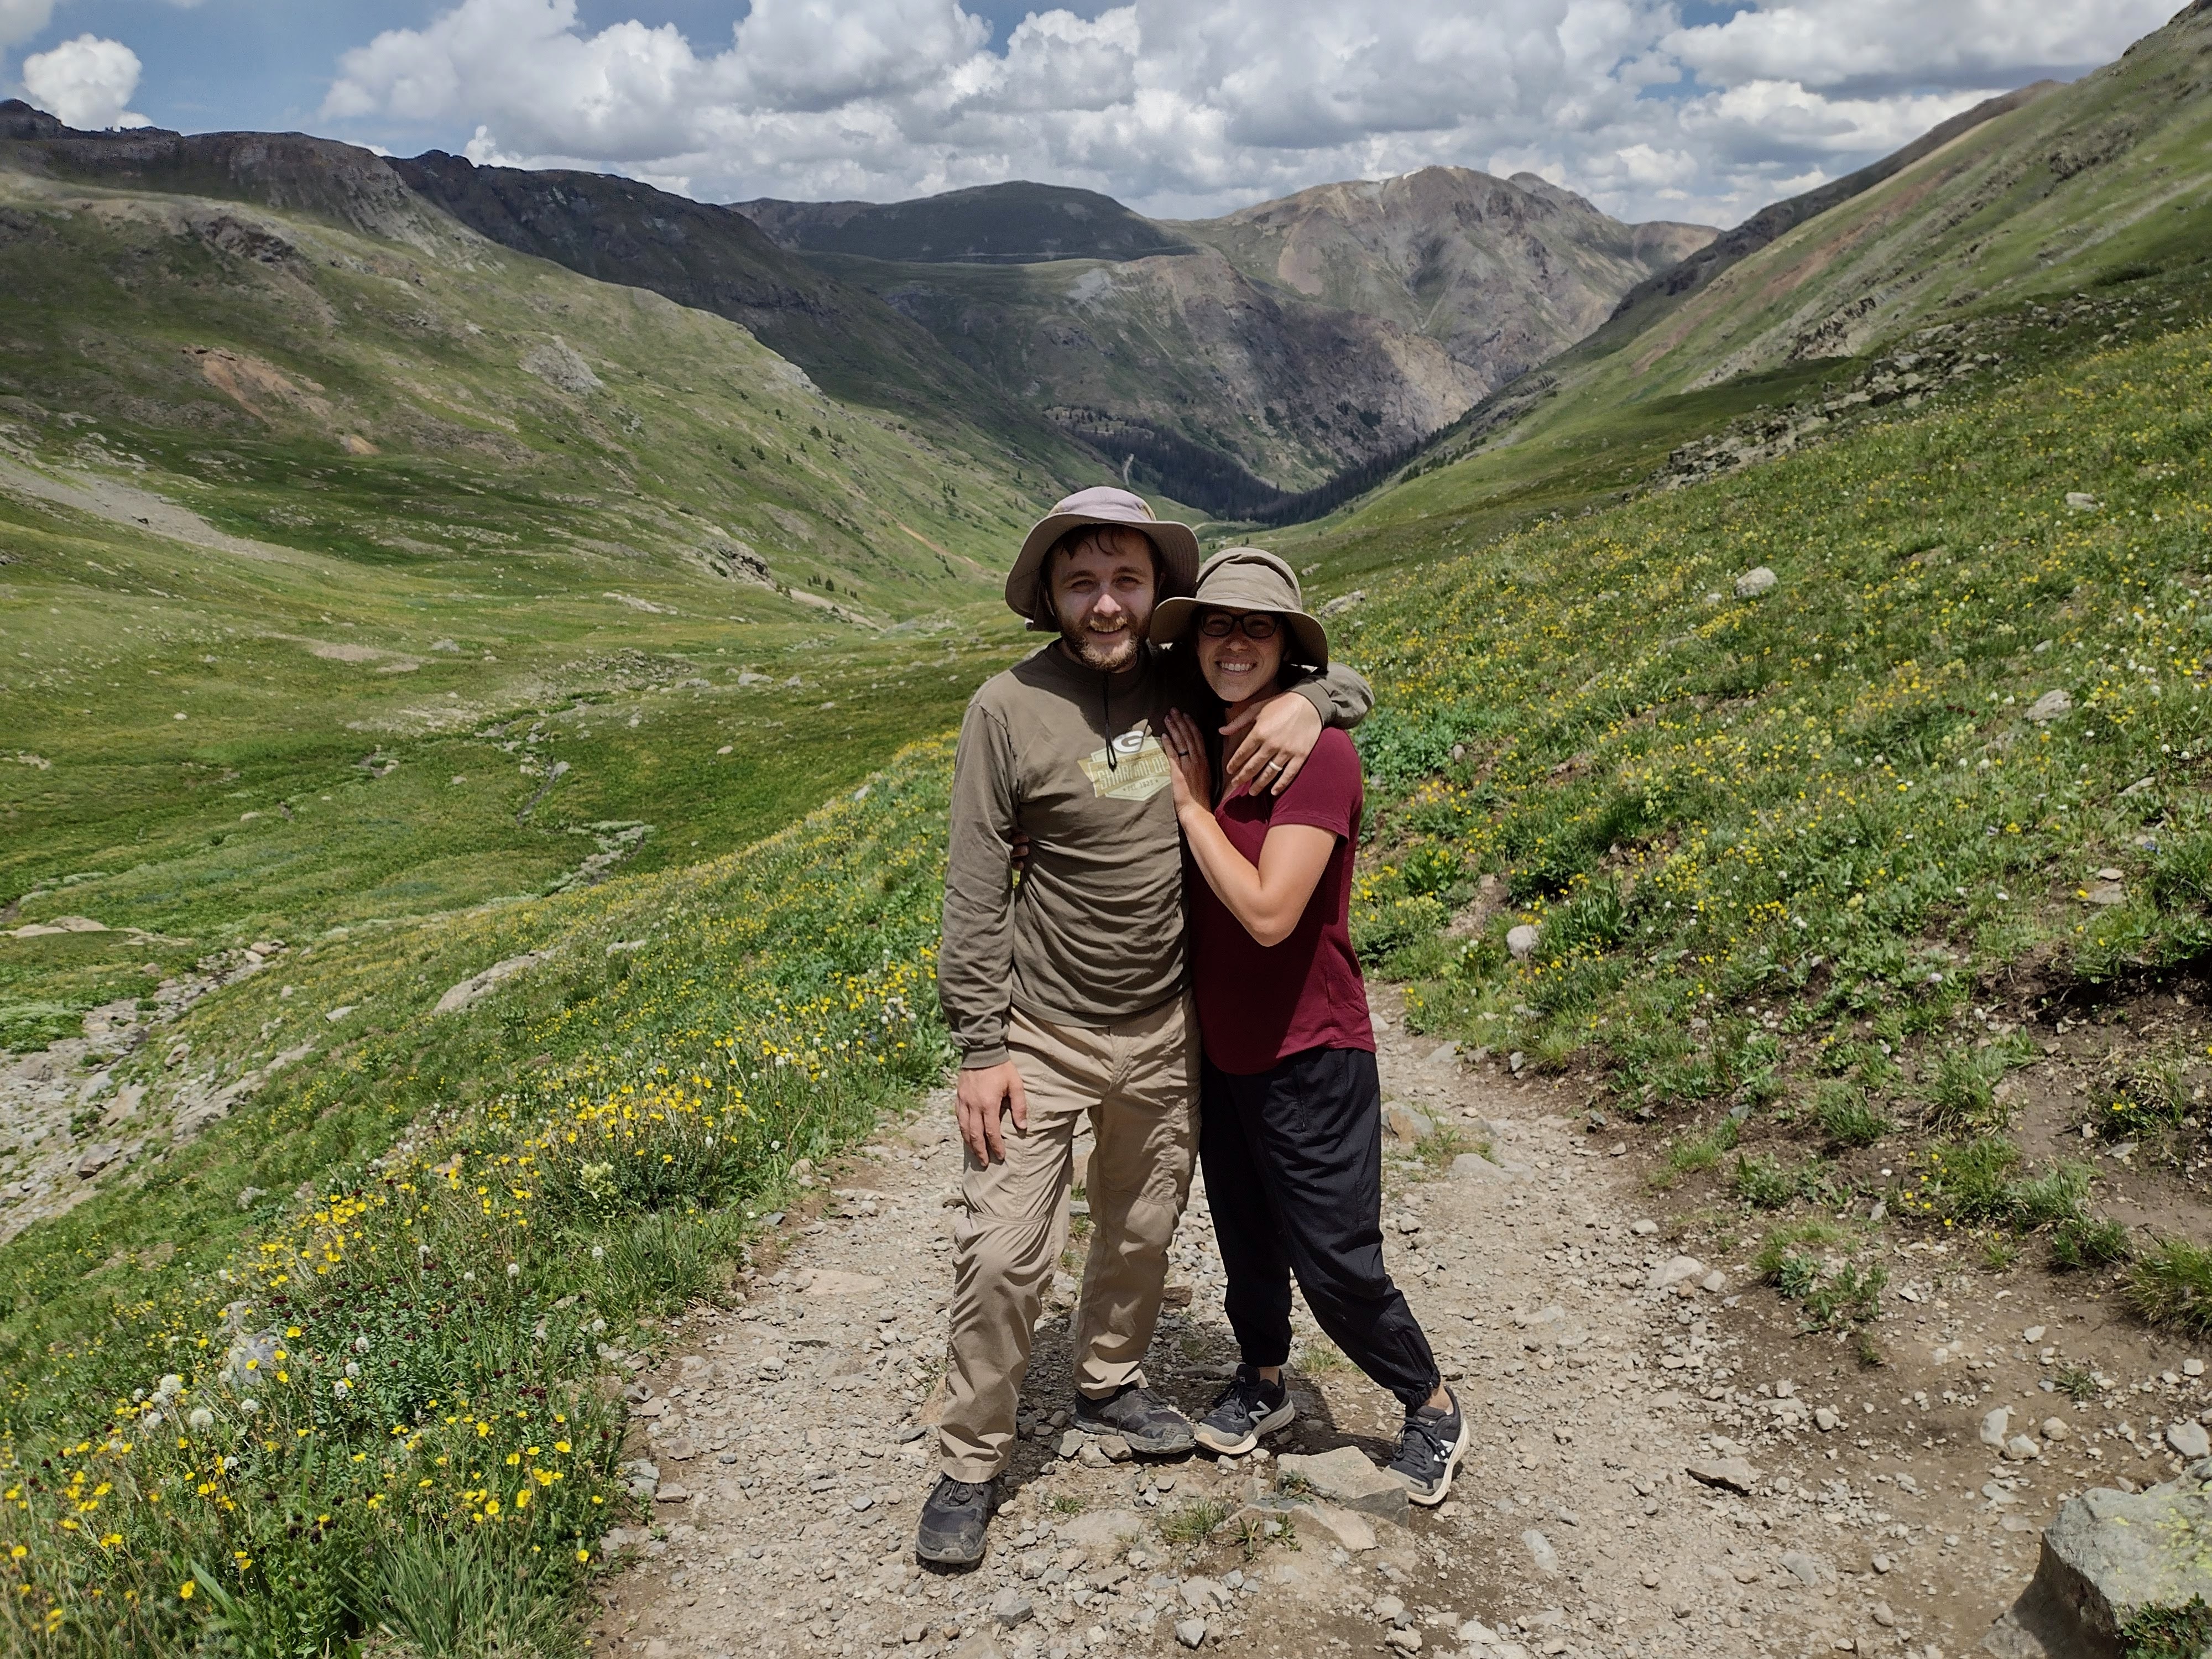 My wife Julia and I stand in front of the flowering American Basin, with bare mountains and thunderclouds in the distance